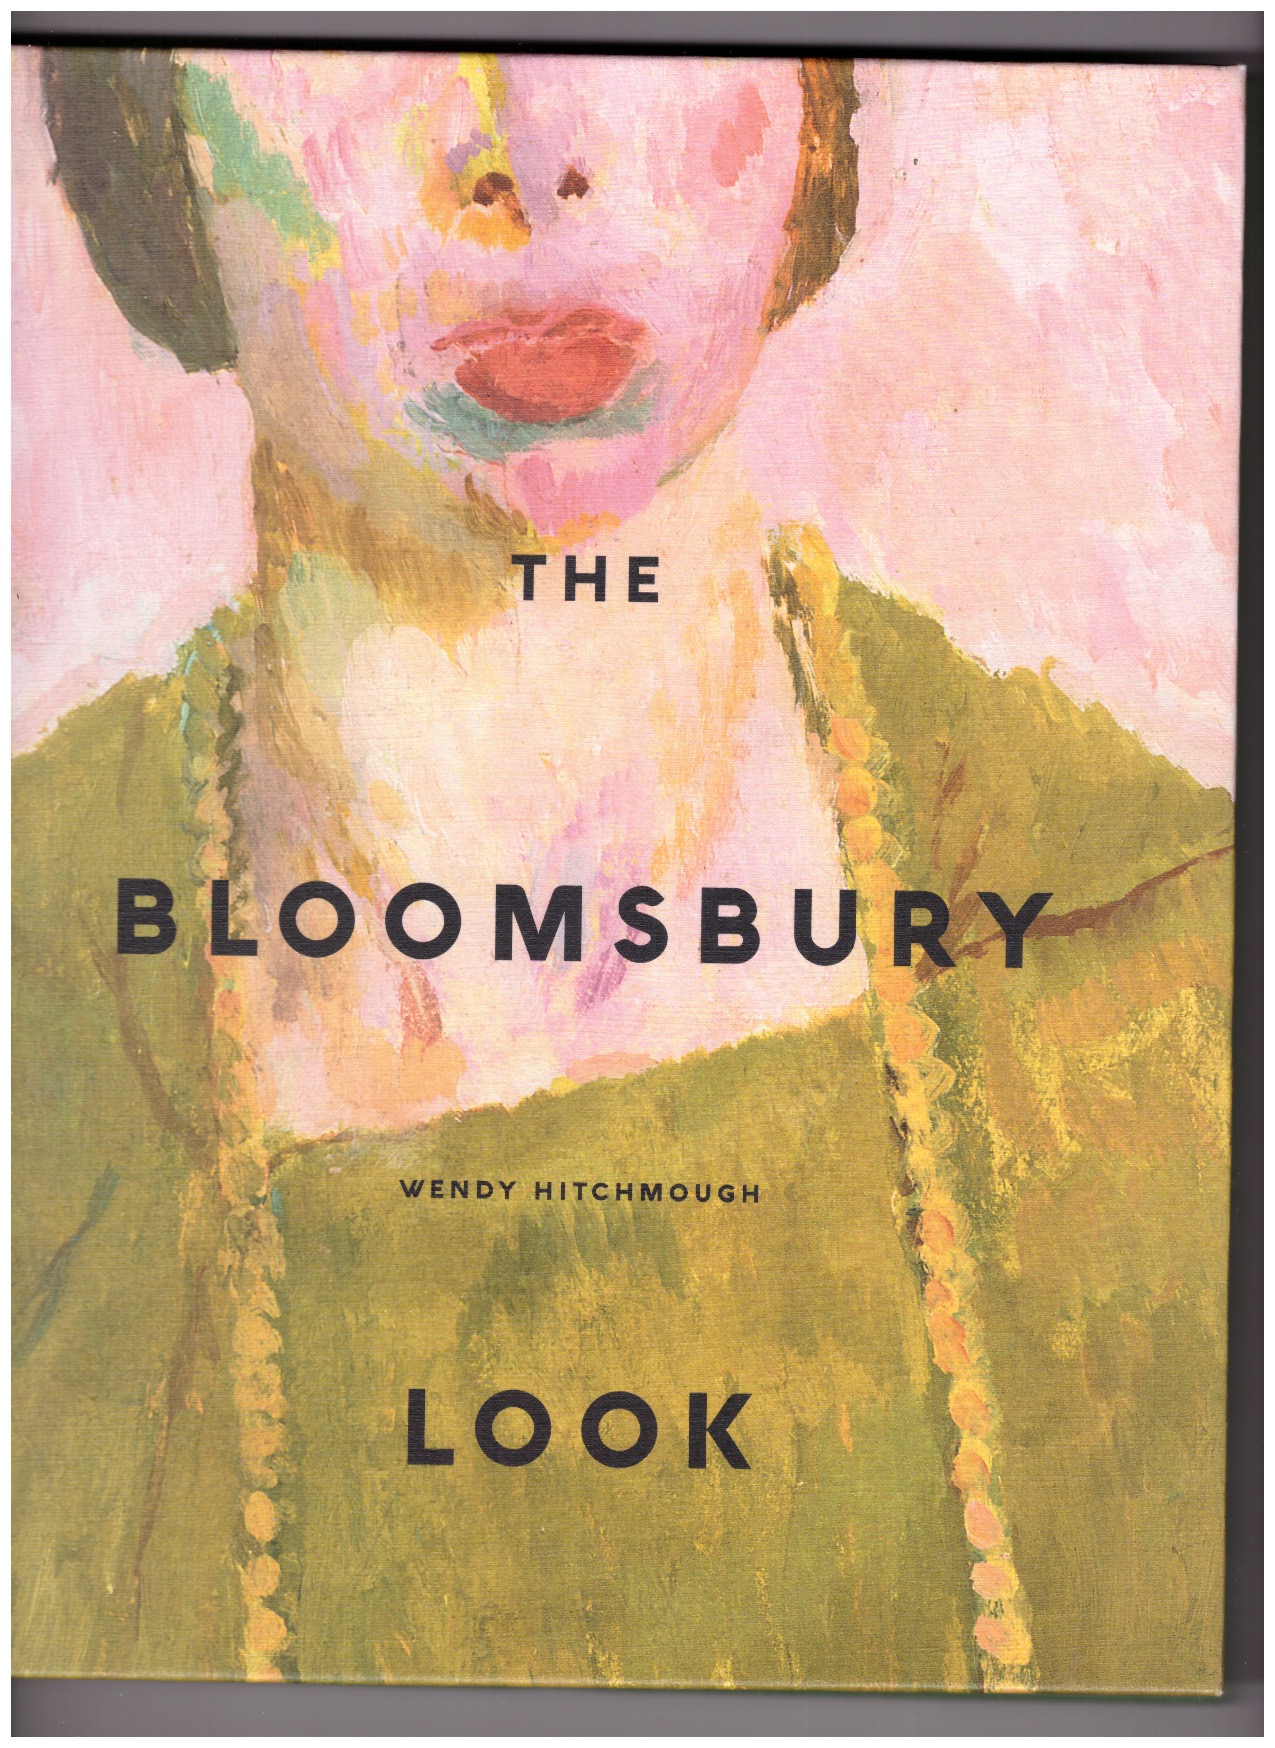 HITCHMOUGH, Wendy - The Bloomsbury Look